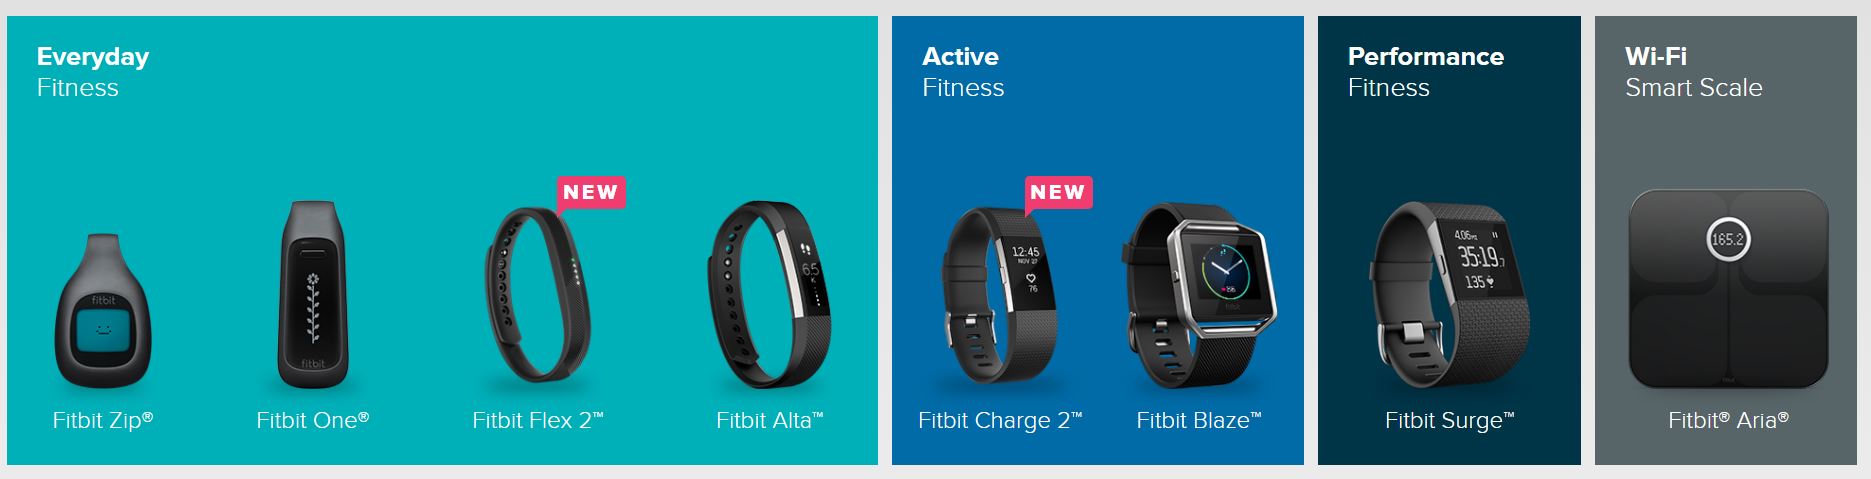 Figure 1. Fitbit’s 2016 product offerings, categorized by activity level [1].